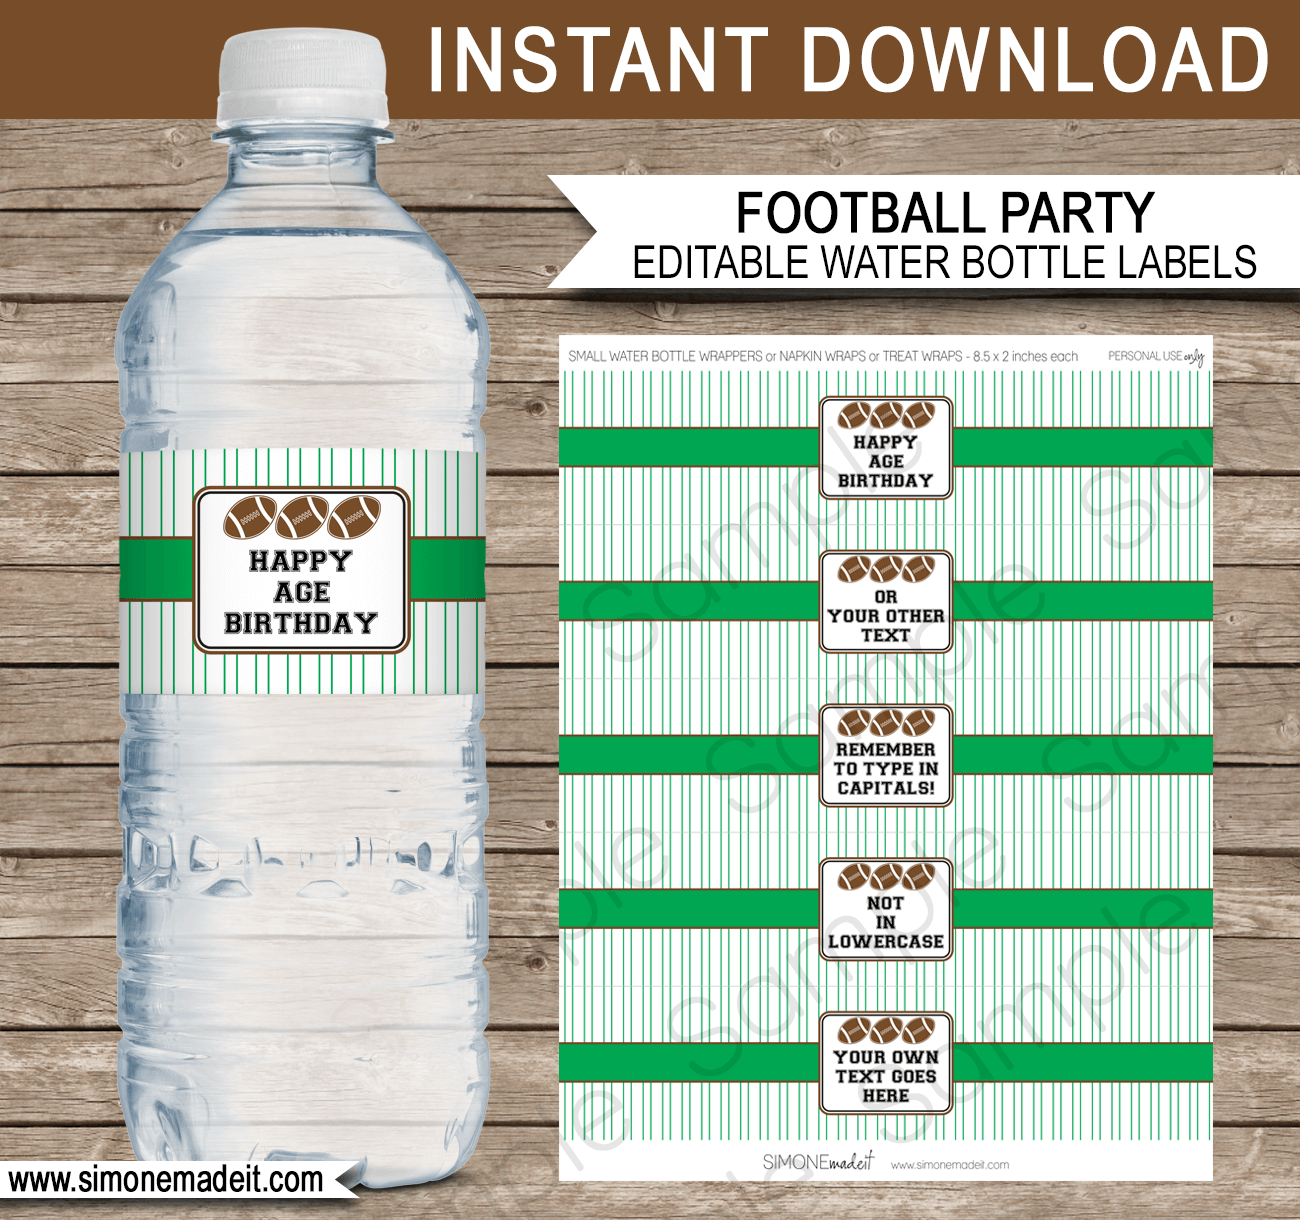 Printable Football Party Water Bottle Labels Template | Tailgate, Superbowl, End of Year Team, Birthday Party Decorations | DIY Editable Text | $3.00 INSTANT DOWNLOAD via SIMONEmadeit.com